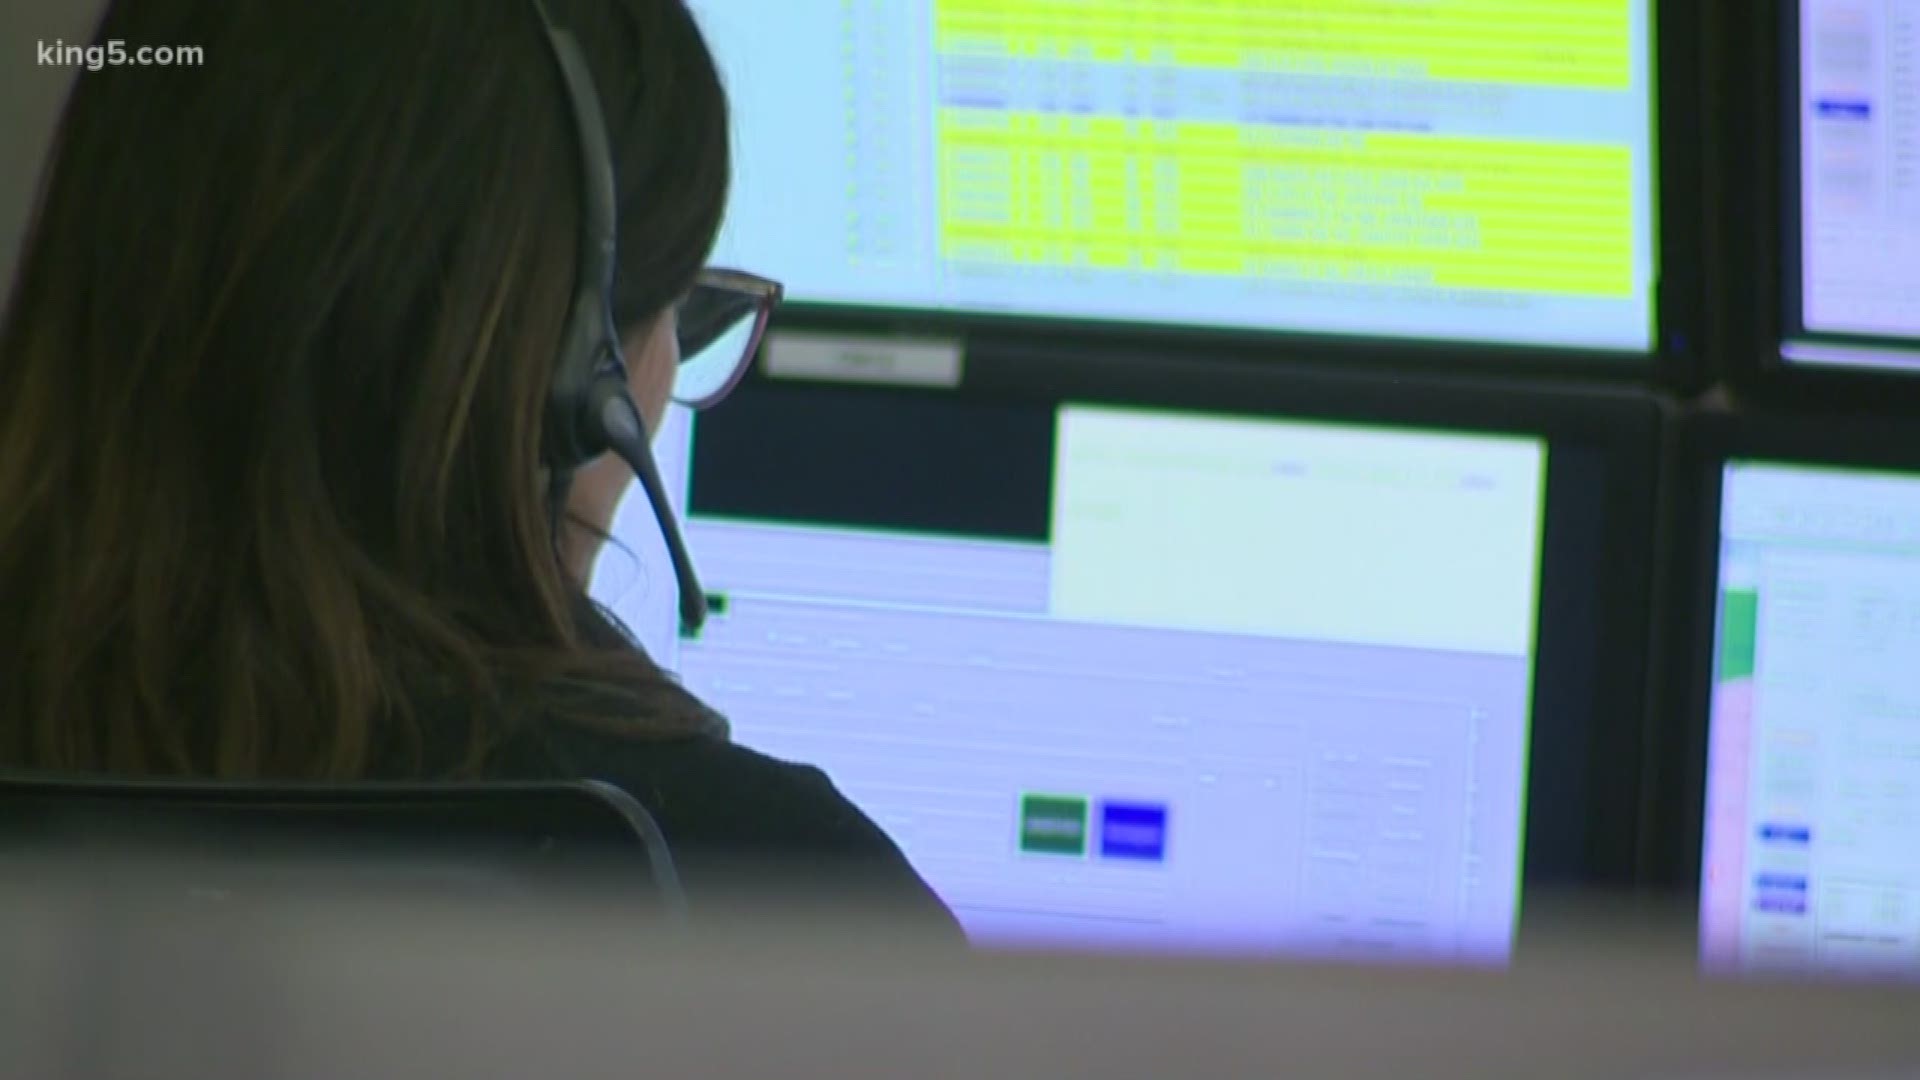 If all goes according to plan, you will be able to text 911 in Pierce county beginning Wednesday. South Sound 911 has been working to get its system up and running and its employees trained to start using the system Wednesday. KING 5's Jenna Hanchard got a look at how the system works and the benefits.